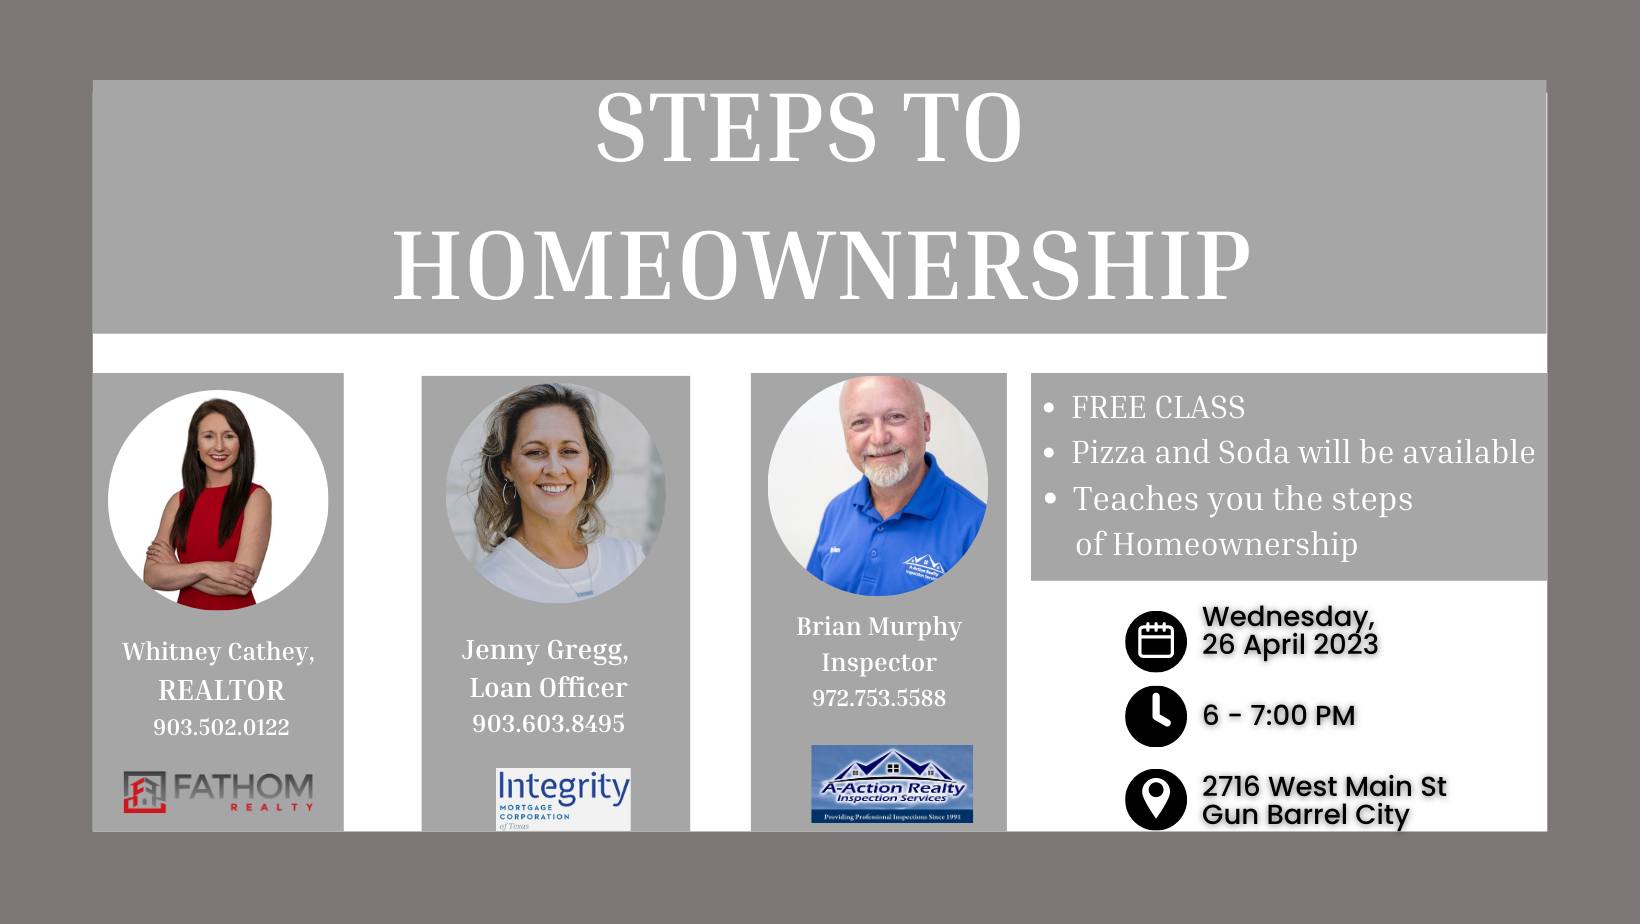 Steps To Home Ownership With Whitney Cathey Realtor 1 Steps To Home Ownership with CedarCreekLake.Online